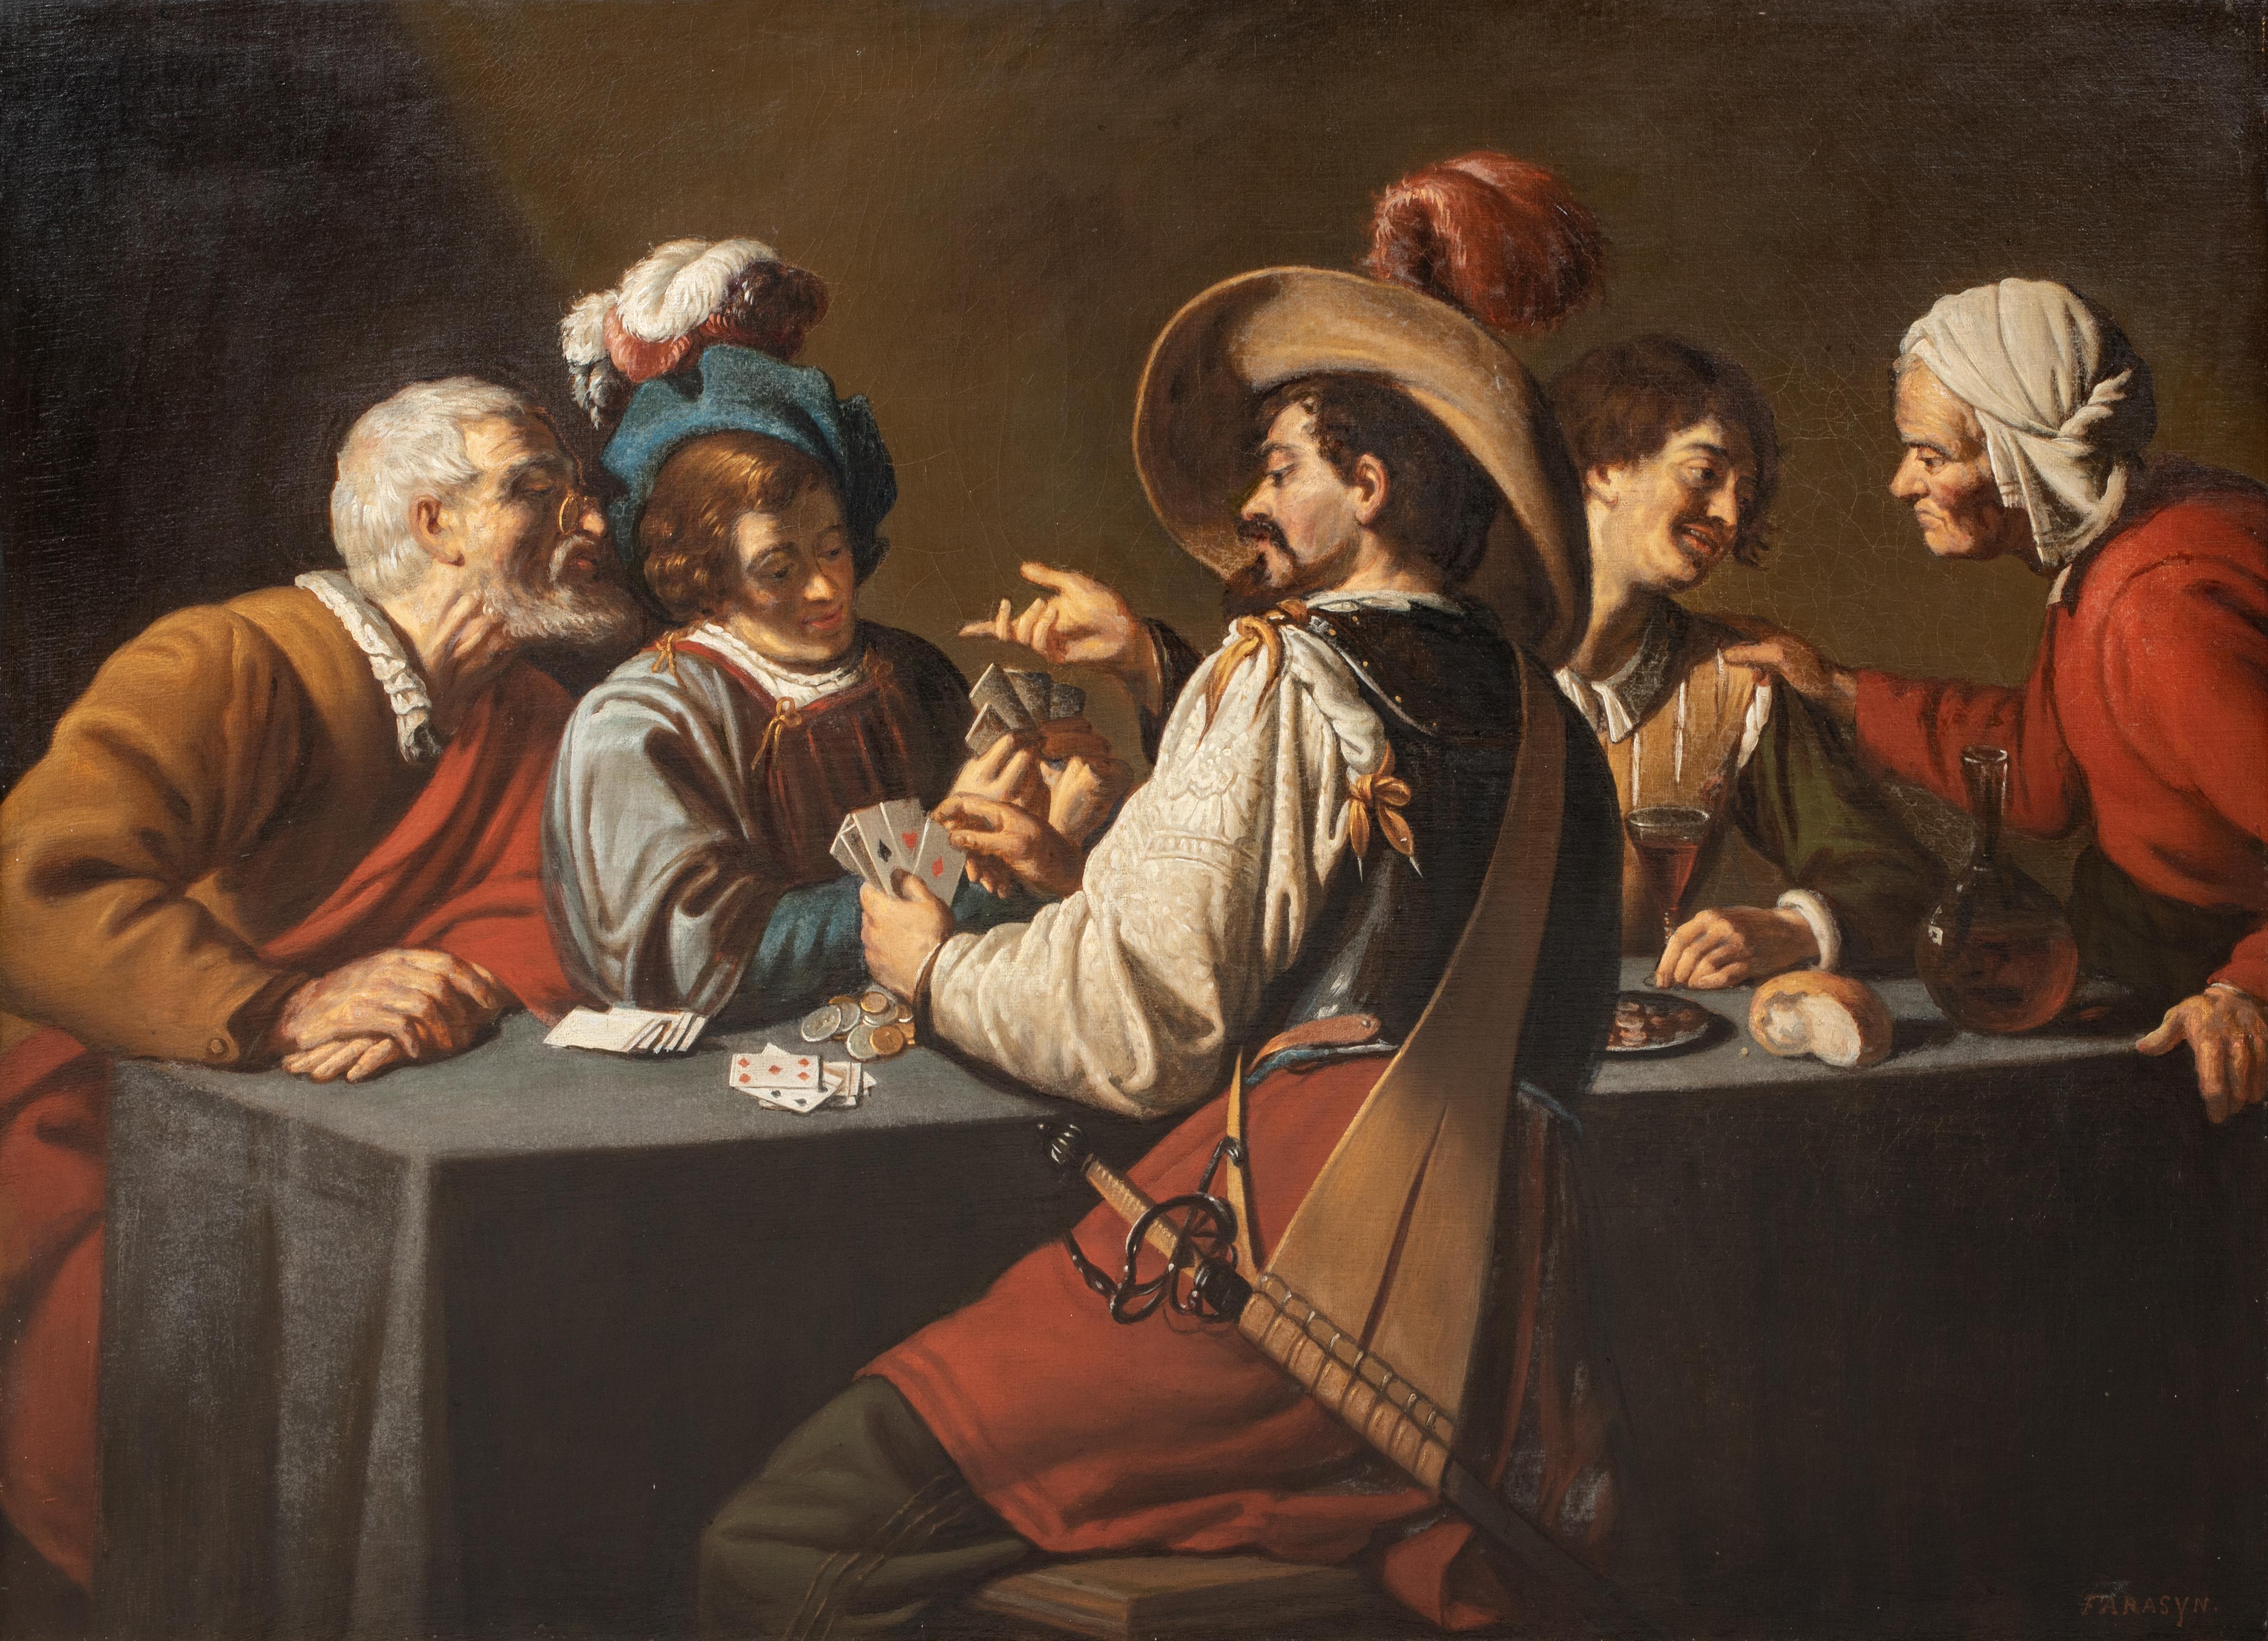 The Card Cheats, 19th Century

Edgard FARASYN (19th Century French) sales to $24,000

Large 19th Century French scene of 17th Century gentlemen playing cards in a tavern, oil on canvas by Edgar Farasyn. Excellent quality and condition large scale